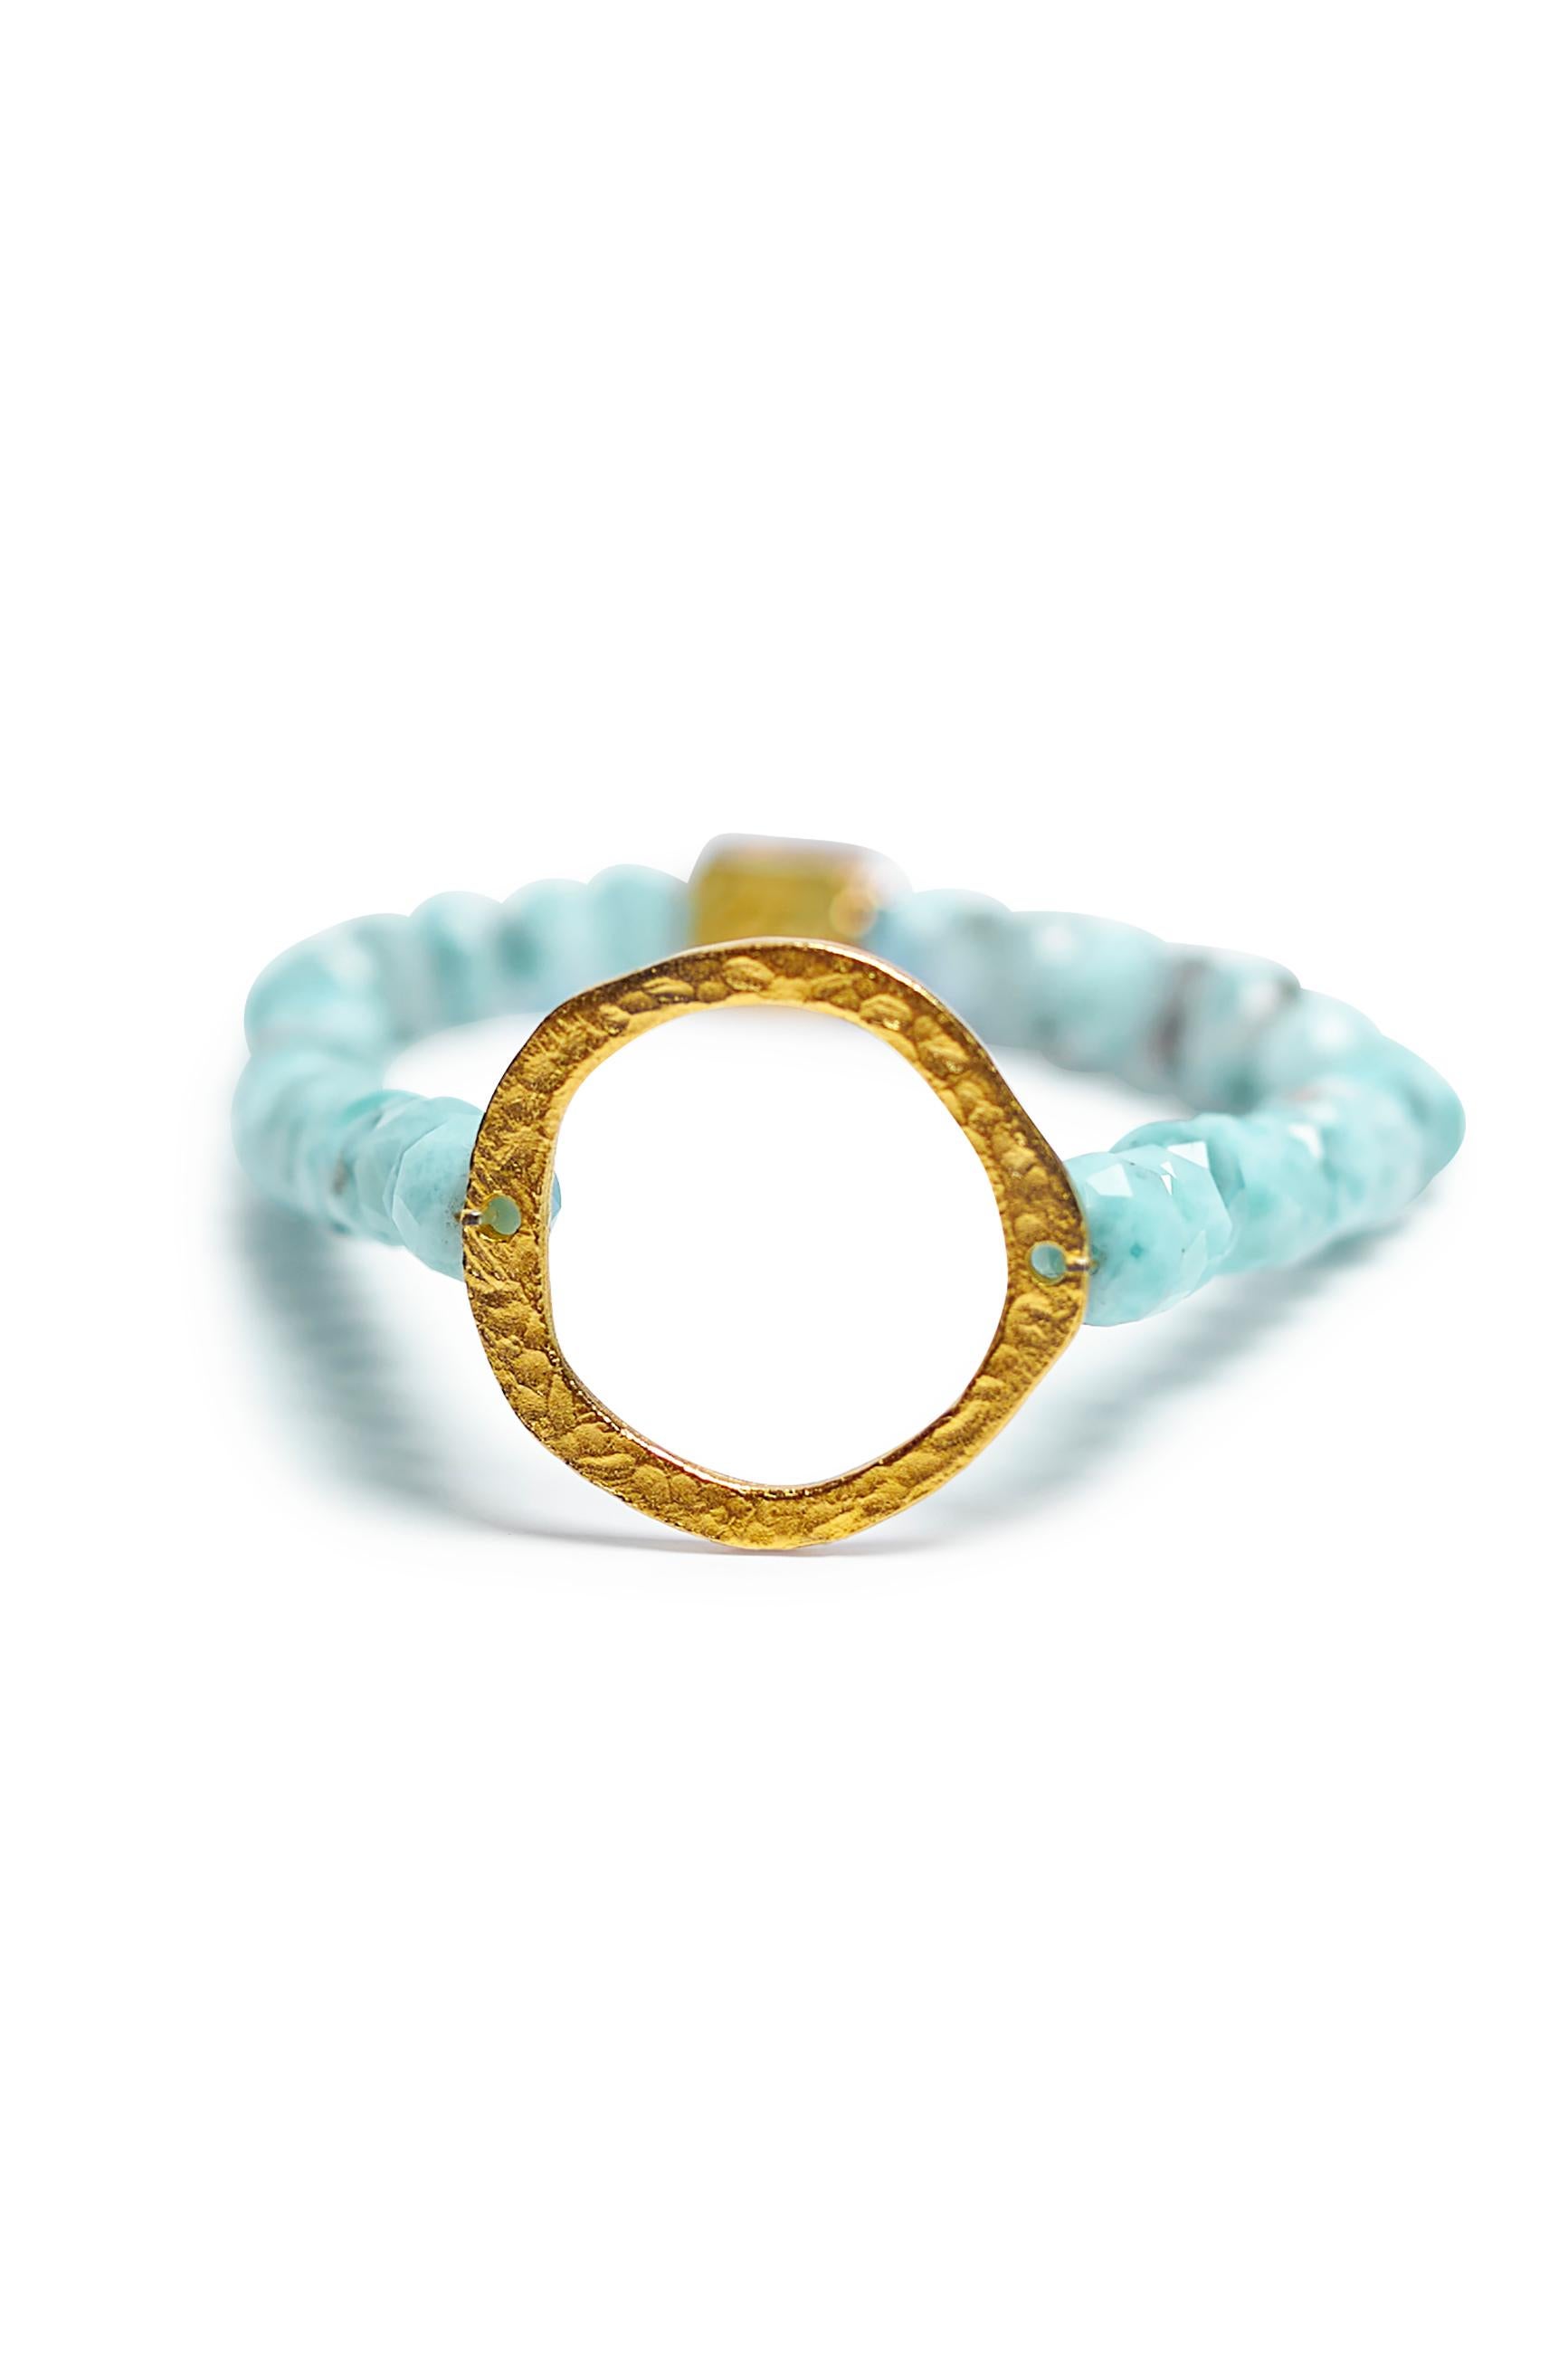 Behind the Jewelry
The 14K gold circle represents timelessness.  There is no beginning or end, it represents infinite life and love.  The bracelet is adorned with a customer favorite; Larimar, which is a stone that embodies the tranquility of the